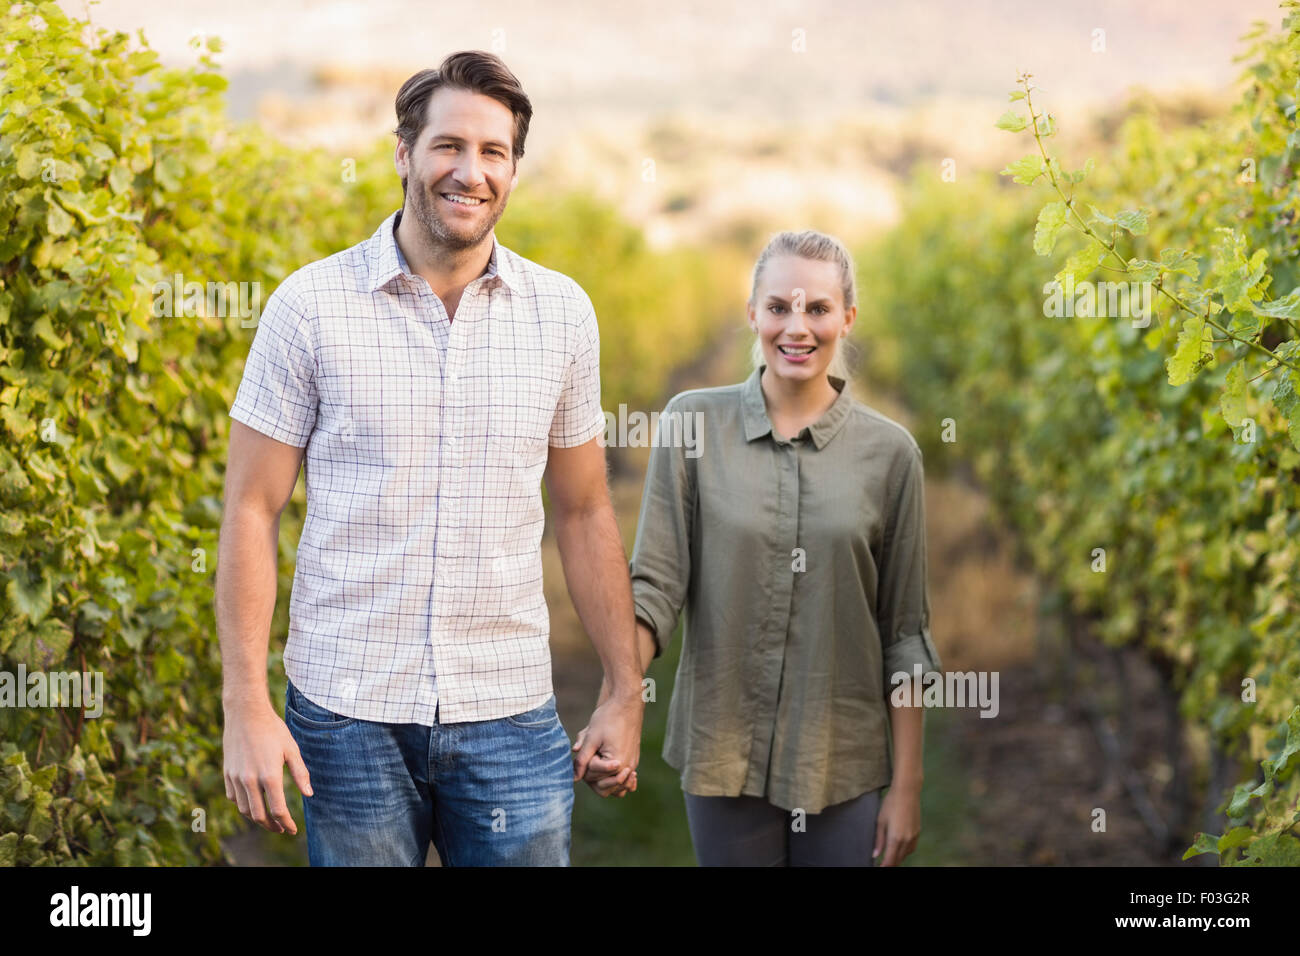 Two young happy vintners holding hands Stock Photo